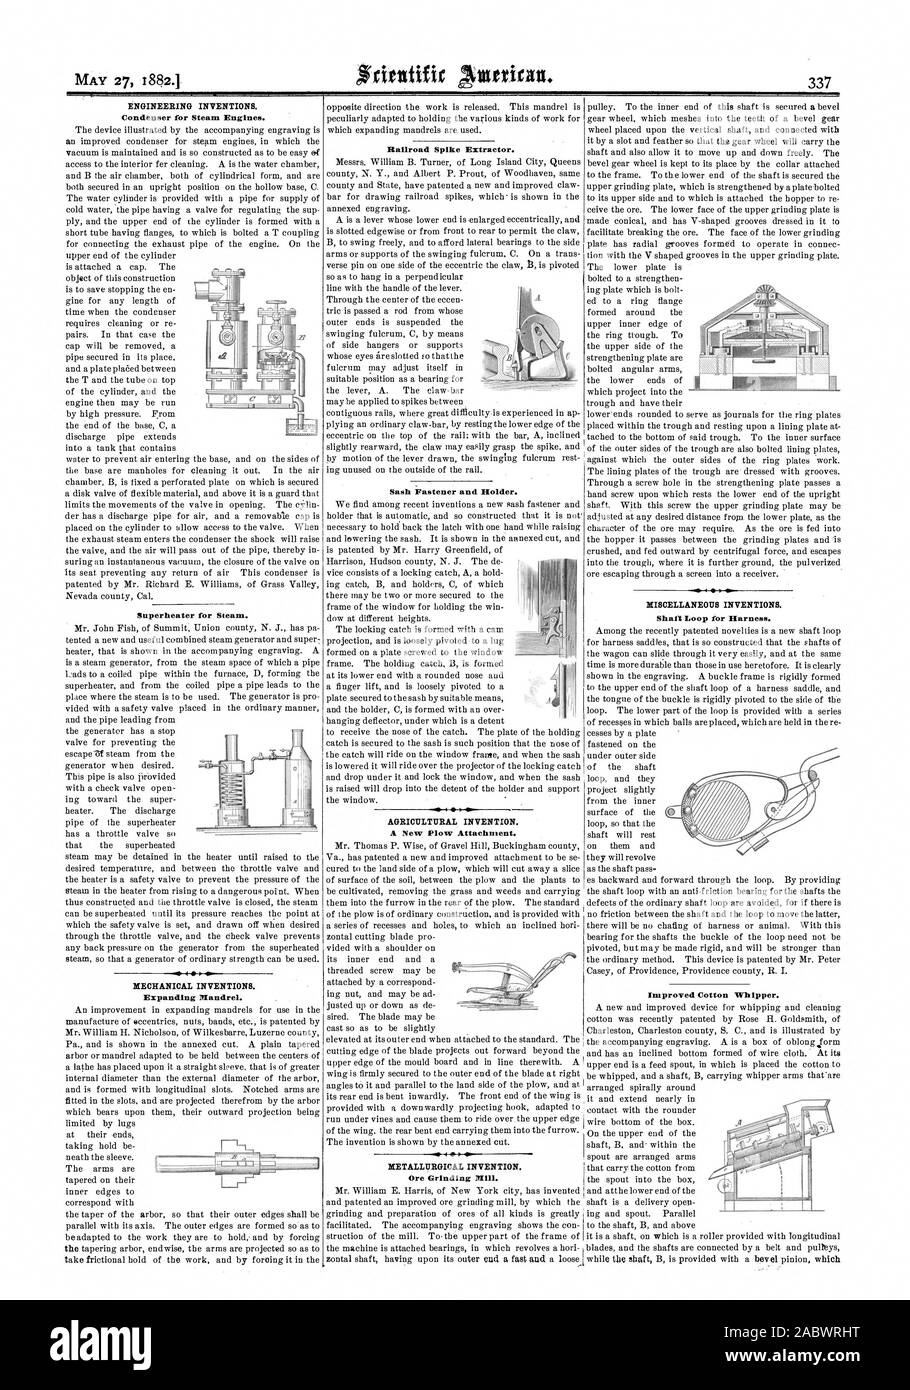 METALLURGICAL INVENTION. Ore Grinding Mill. Railroad Spike Extractor. Sash Fastener and Holder. AGRICULTURAL INVENTION. A New Plow Attachment. ENGINEERING INVENTIONS. Condenser for Steam Engines. Superheater for Steam. MECHANICAL INVENTIONS. Expanding Mandrel. MISCELLANEOUS INVENTIONS. Shall Loop for Harness. Improved Cotton Whipper., scientific american, 1882-05-27 Stock Photo